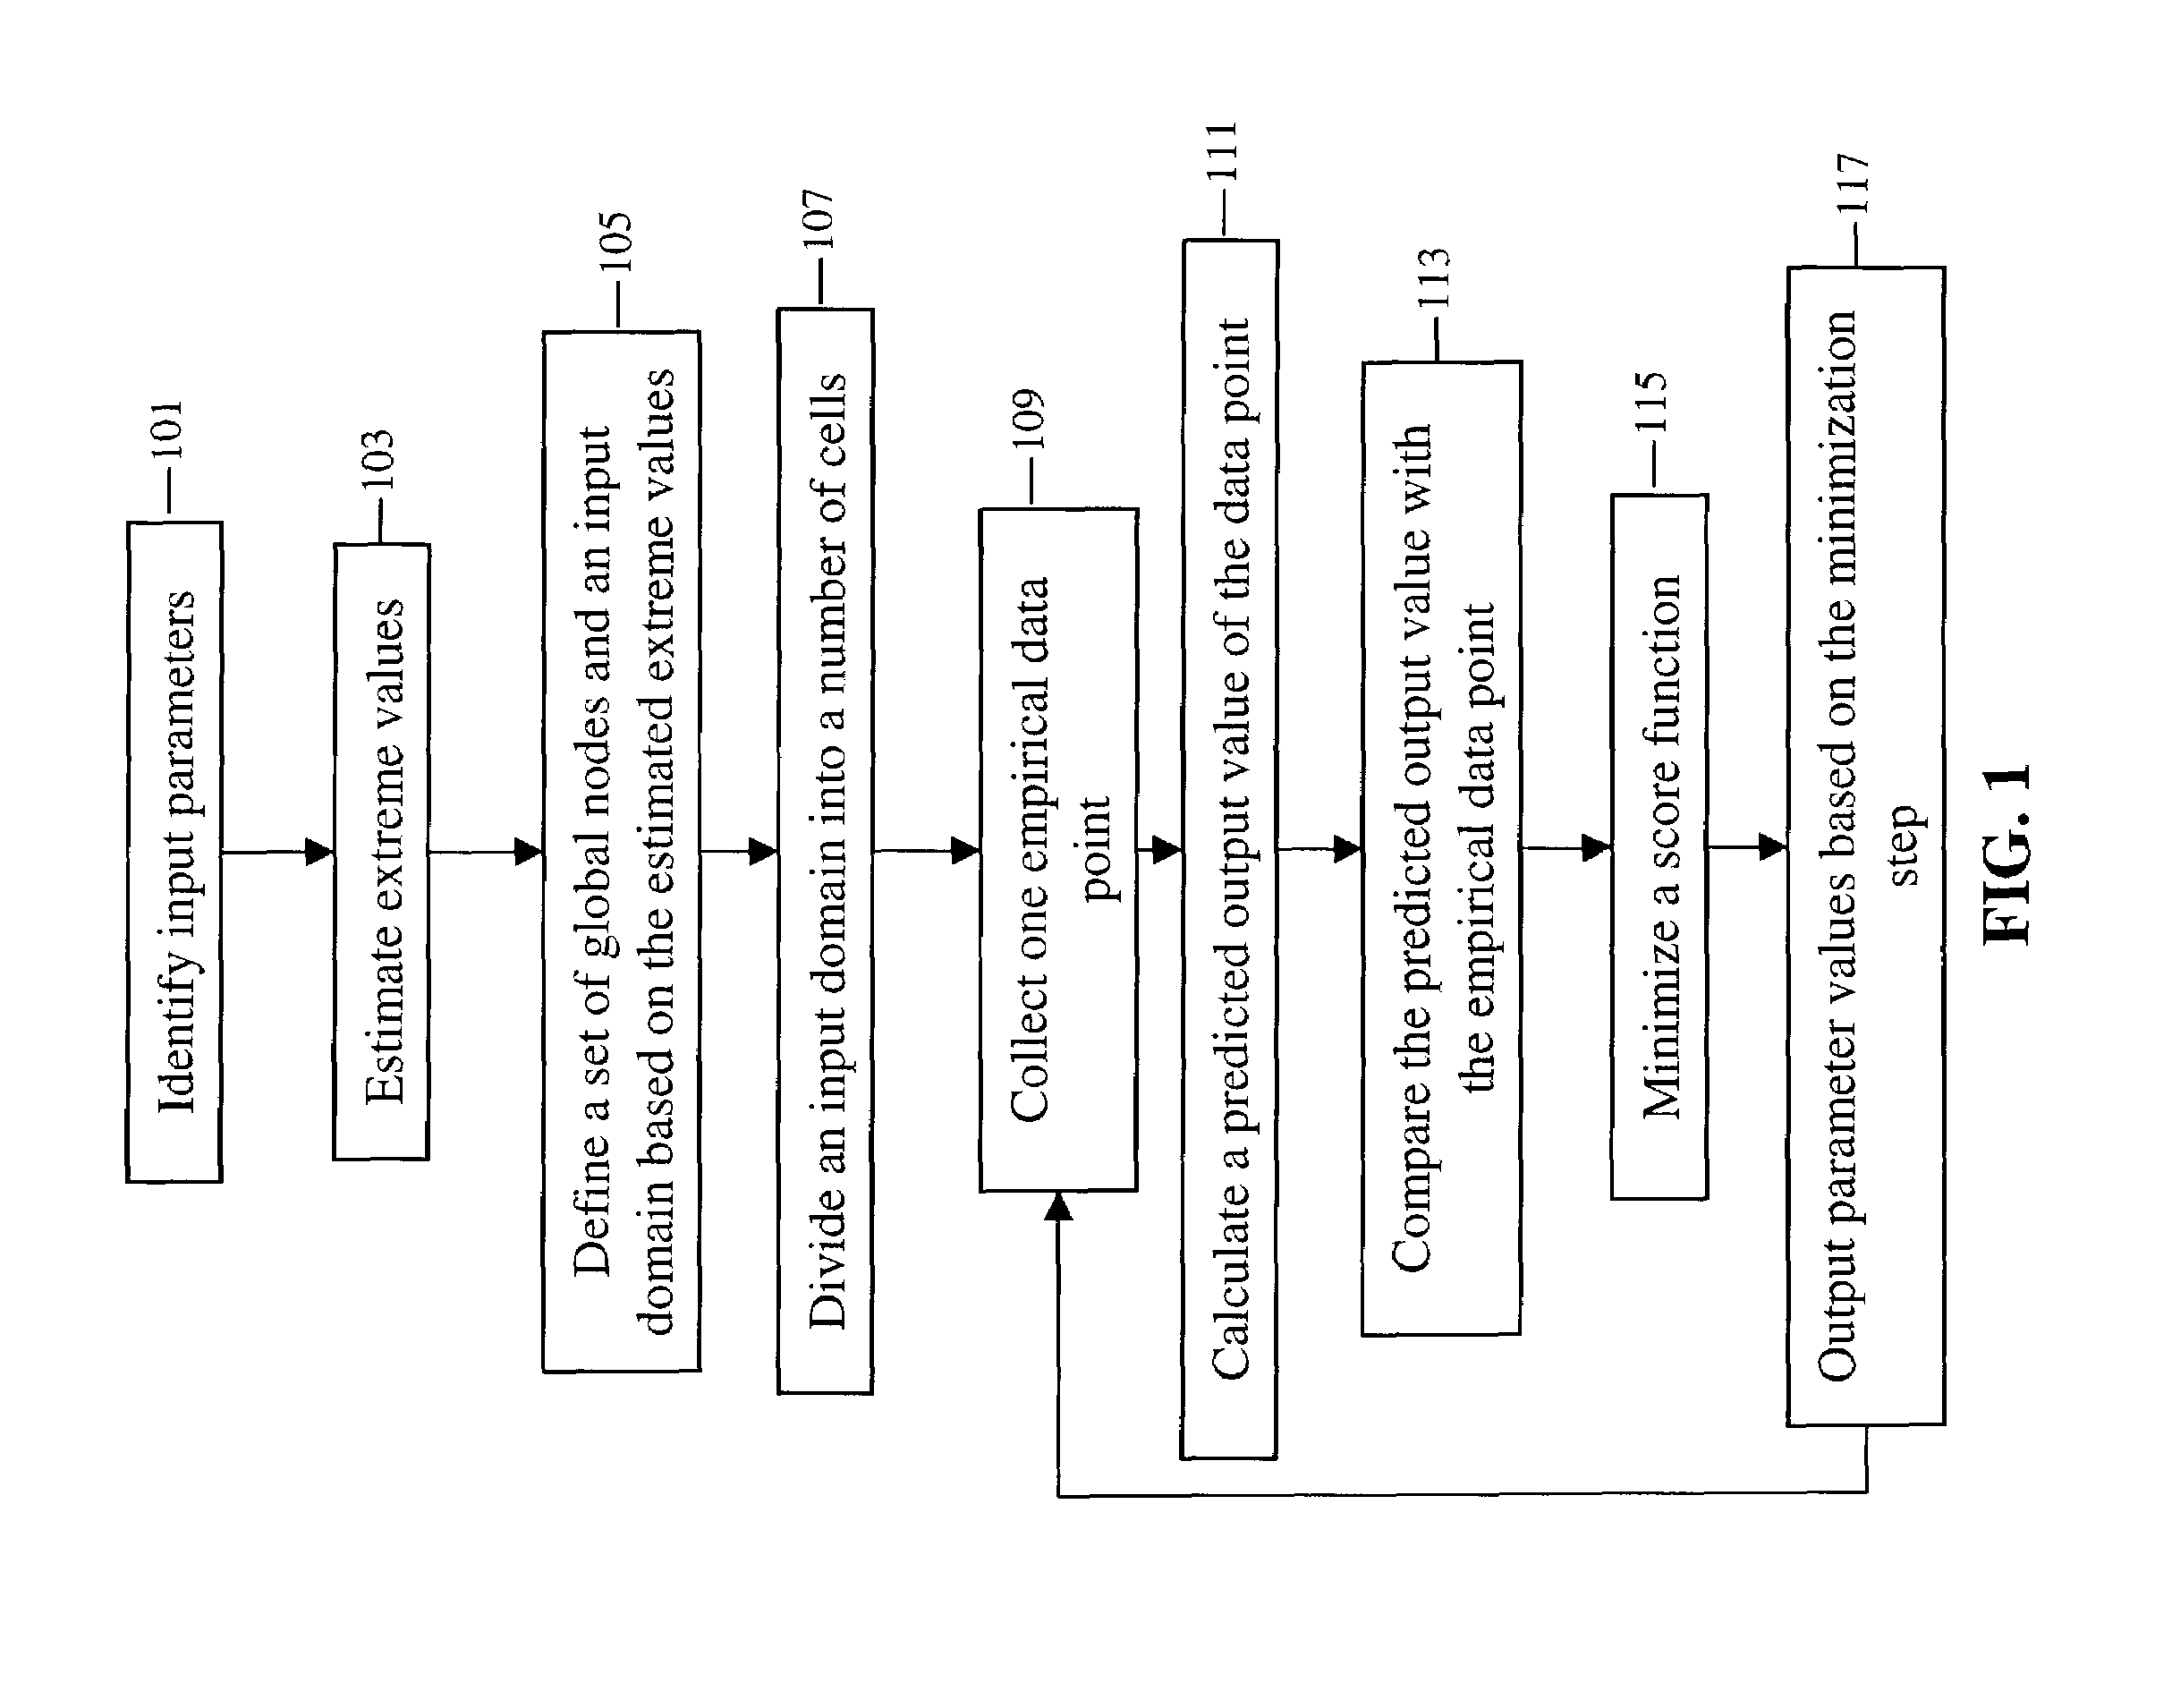 Method, system and medium for controlling manufacturing process using adaptive models based on empirical data